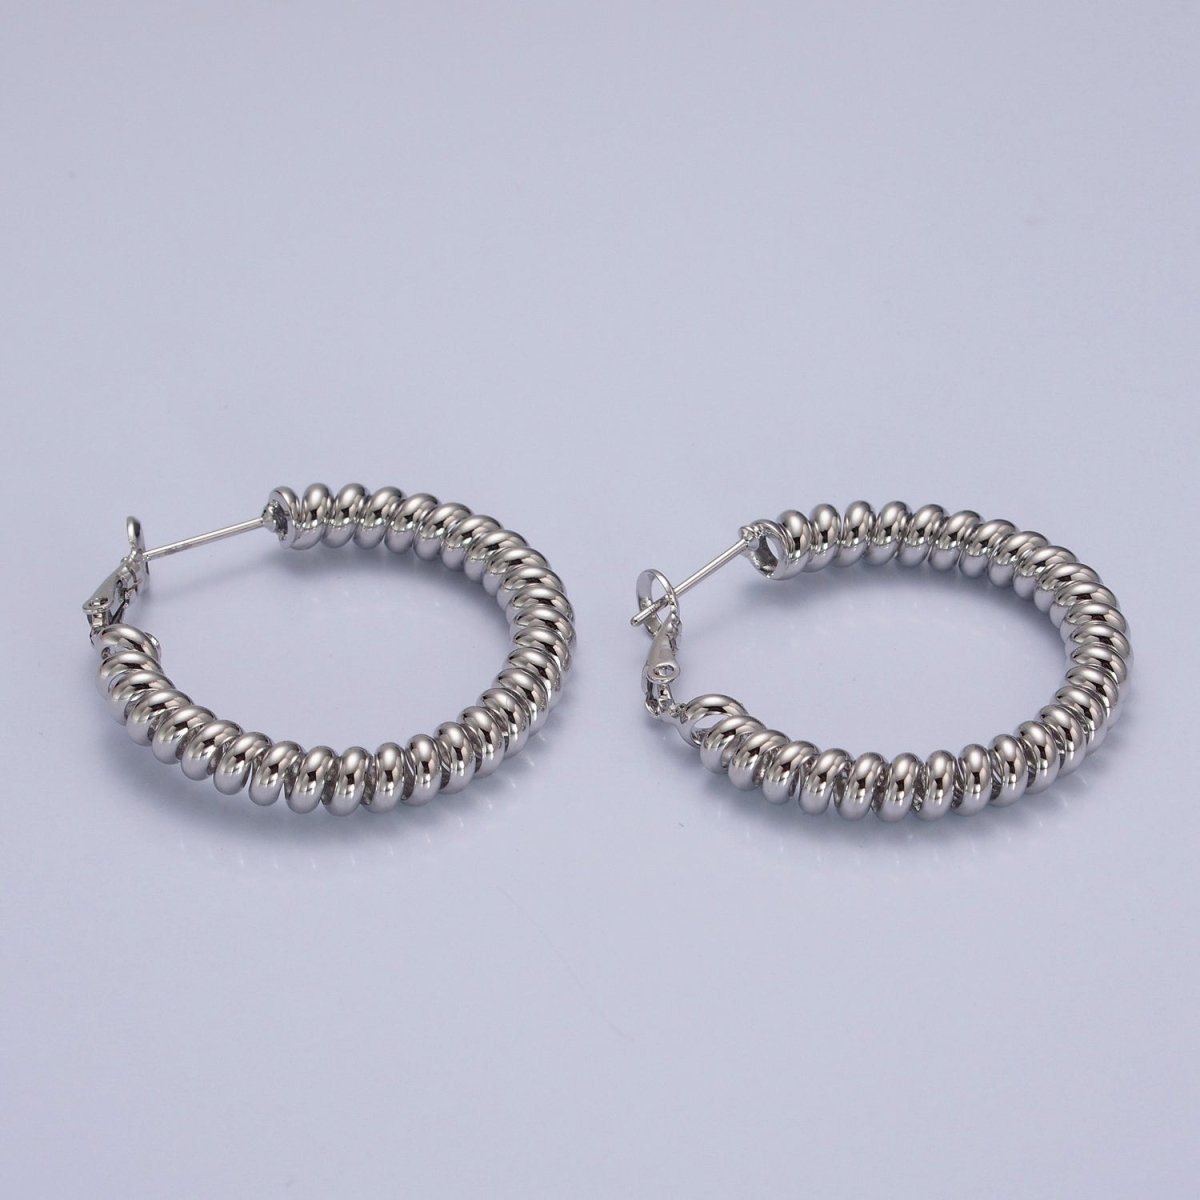 24K Gold Filled Open Spiral Cord Lever Back Hoop Earrings in Gold / Silver P-302 P-303 - DLUXCA